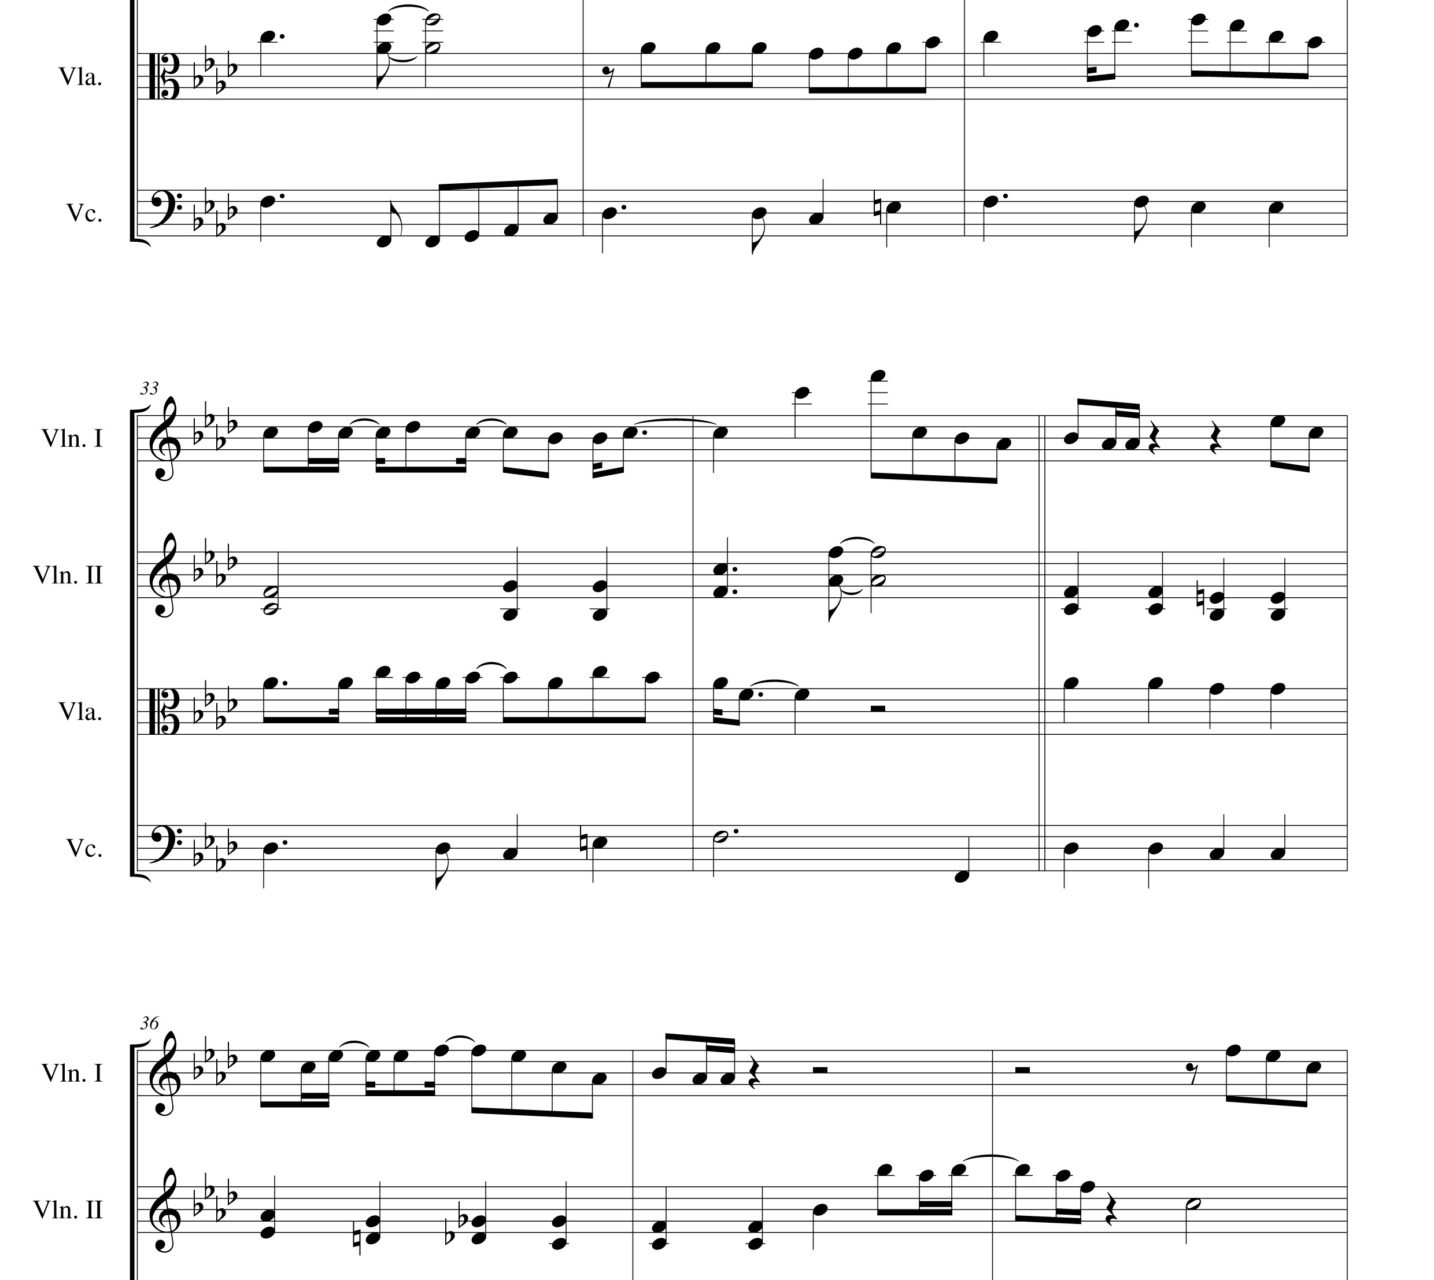 Just the two of us Sheet music - Bill Withers - for String Quartet